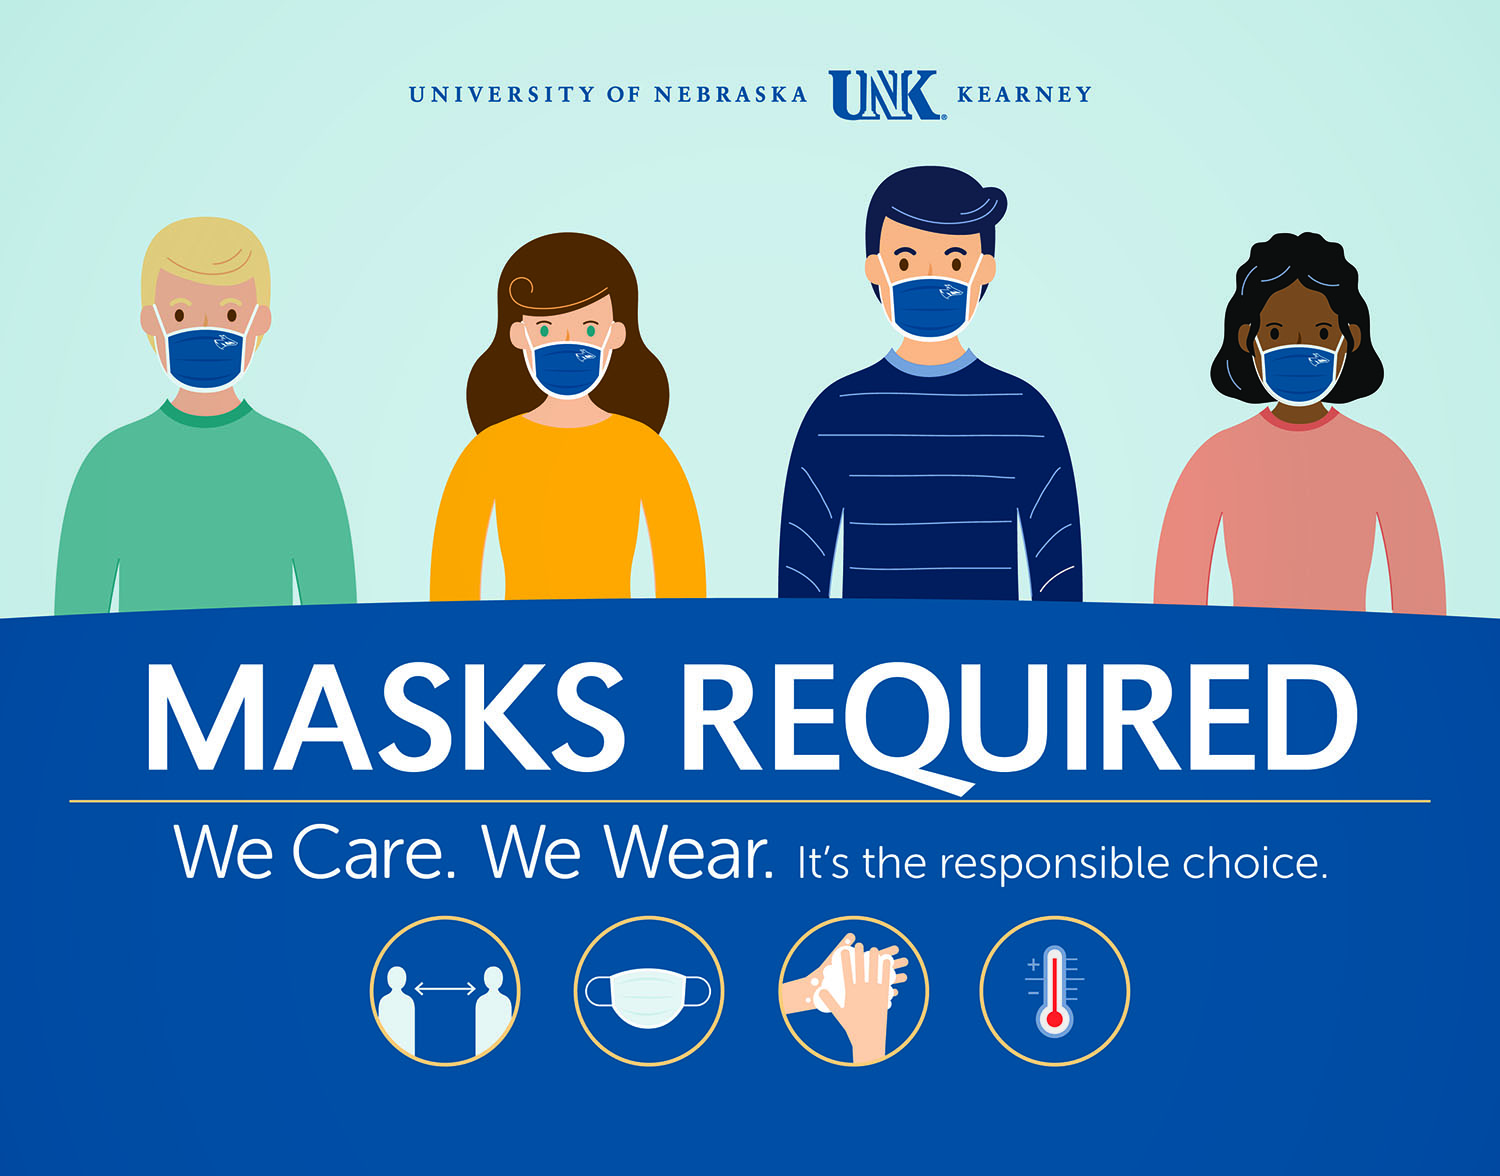 We Care. We Wear Face masks are key component of UNK’s fall plan UNK